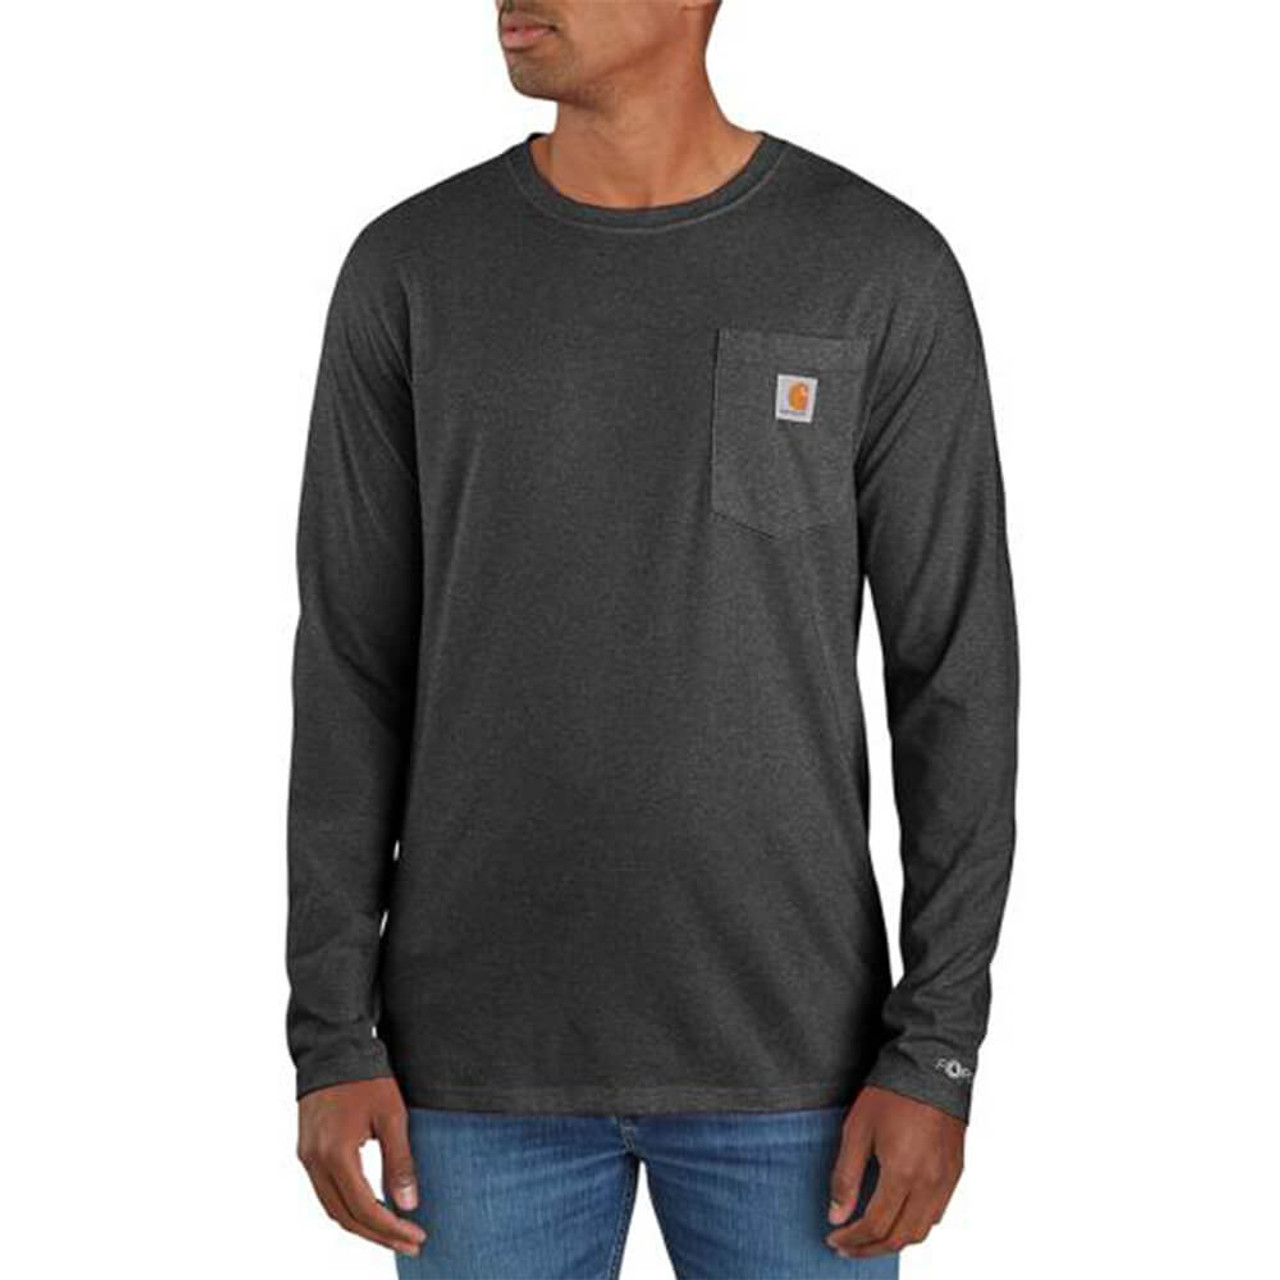 https://cdn11.bigcommerce.com/s-zut1msomd6/images/stencil/1280x1280/products/31165/220588/mens-carhartt-long-sleeve-force-relaxed-fit-pocket-tee-104617-CRHCARBN__63427.1664571912.jpg?c=1